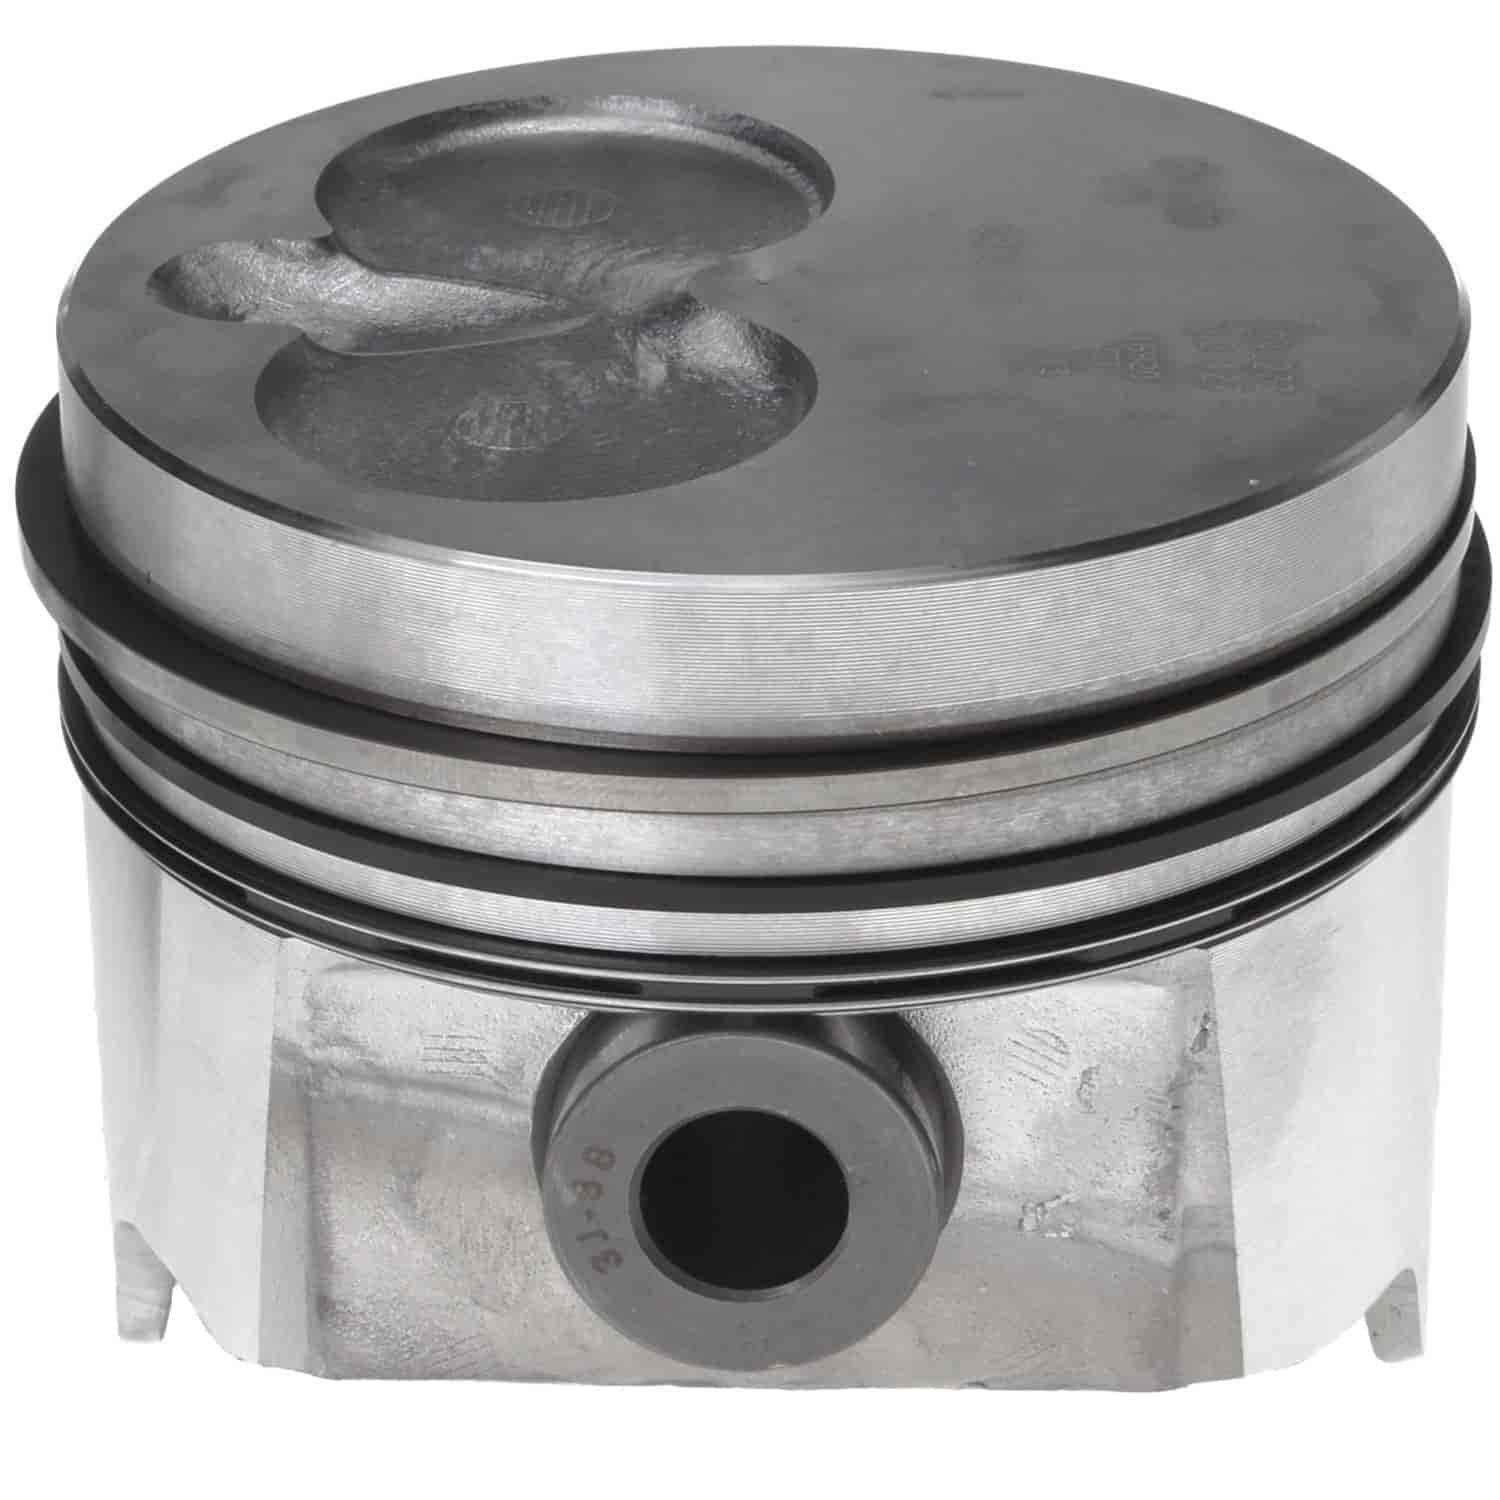 Piston and Rings Set 1988-1994 Ford PowerStroke Diesel V8 7.3L with 4.140" Bore (+.030")